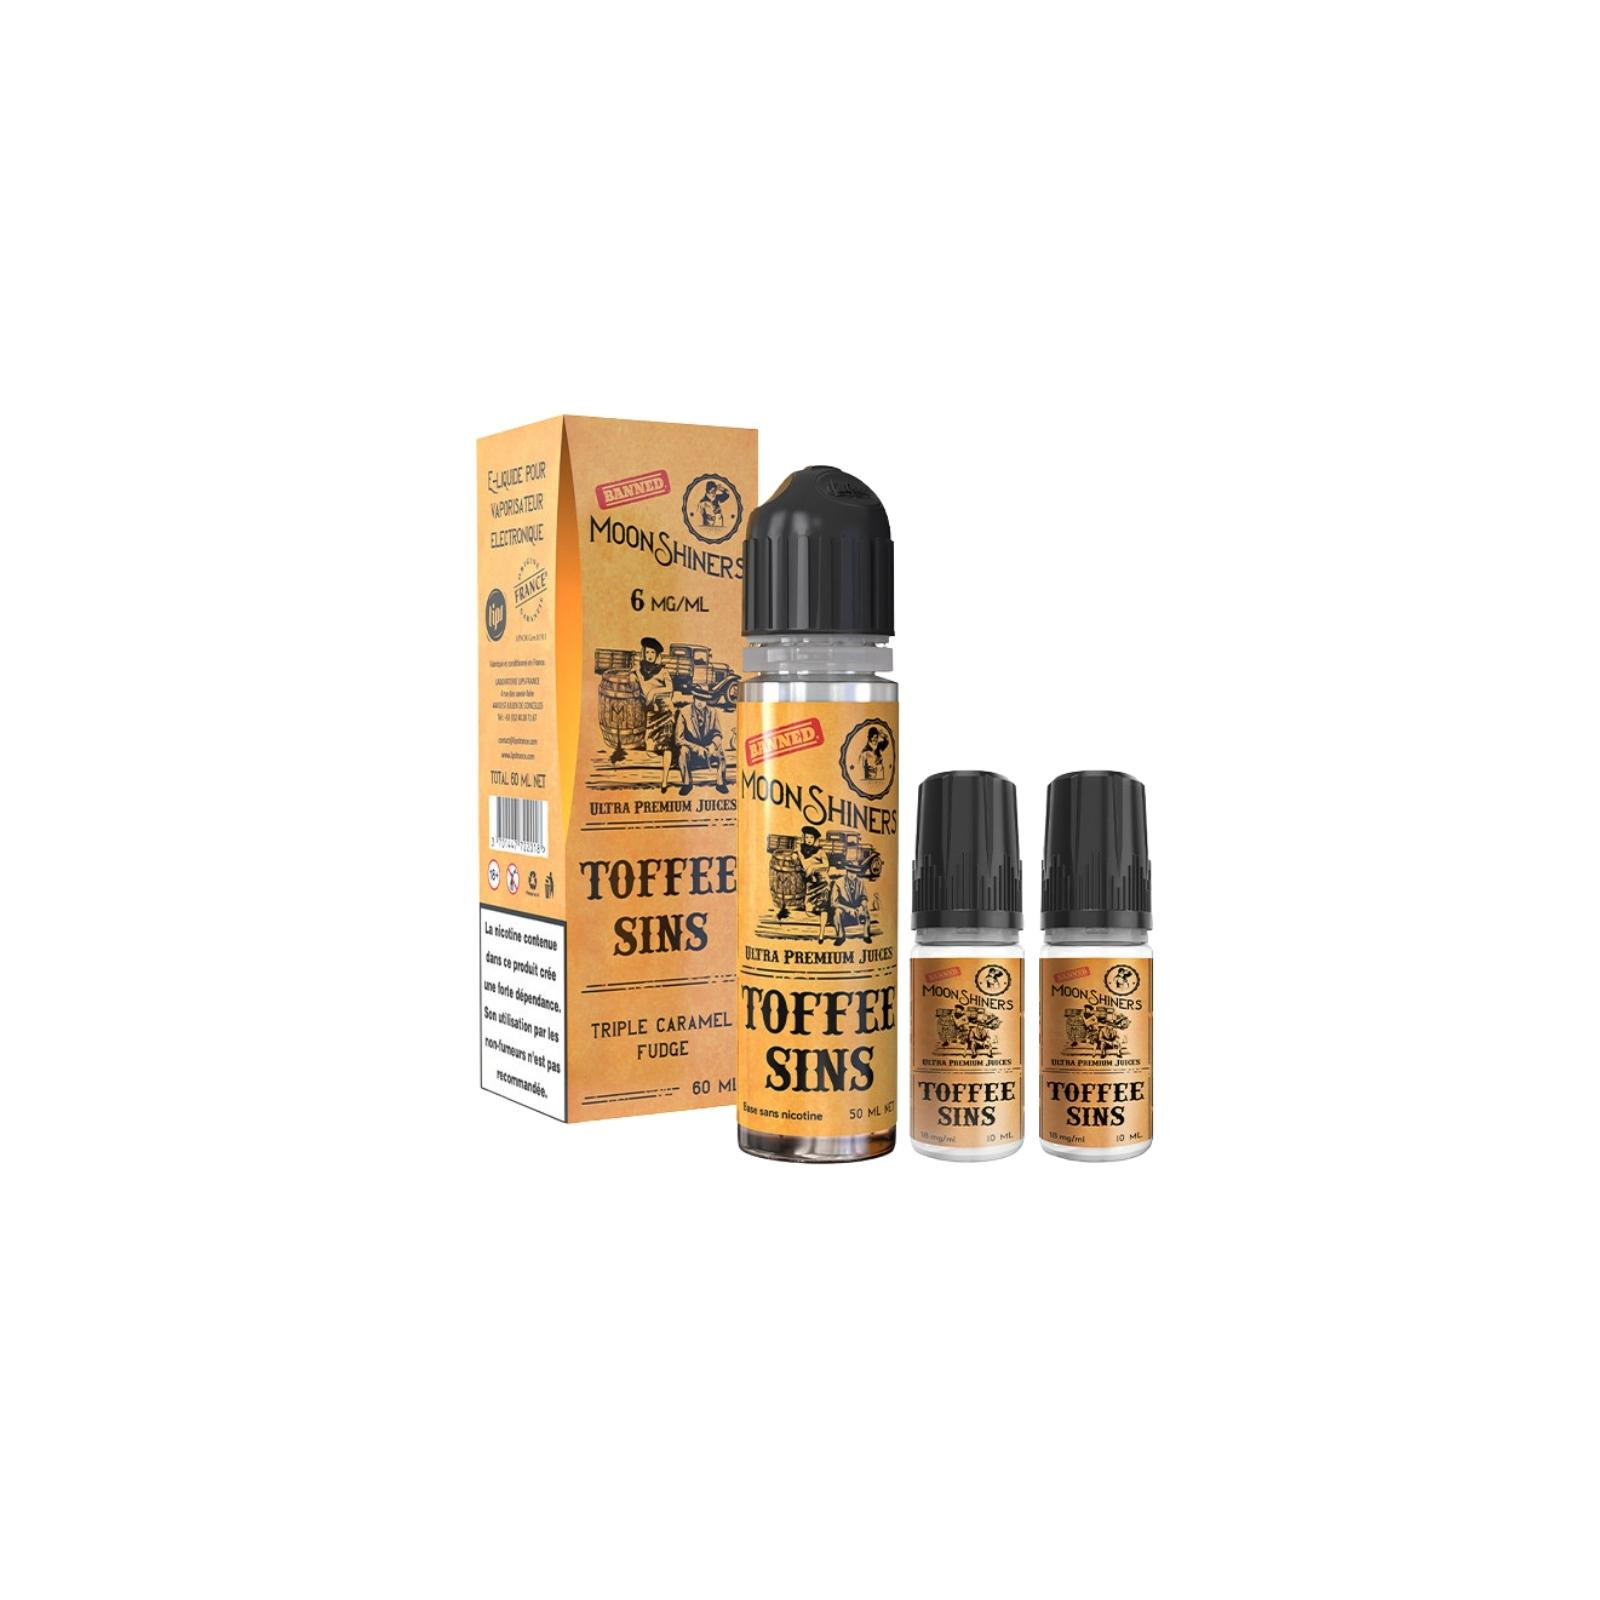 Toffee Sins 60 ml (Pack liquide et booster) - Moon Shiners